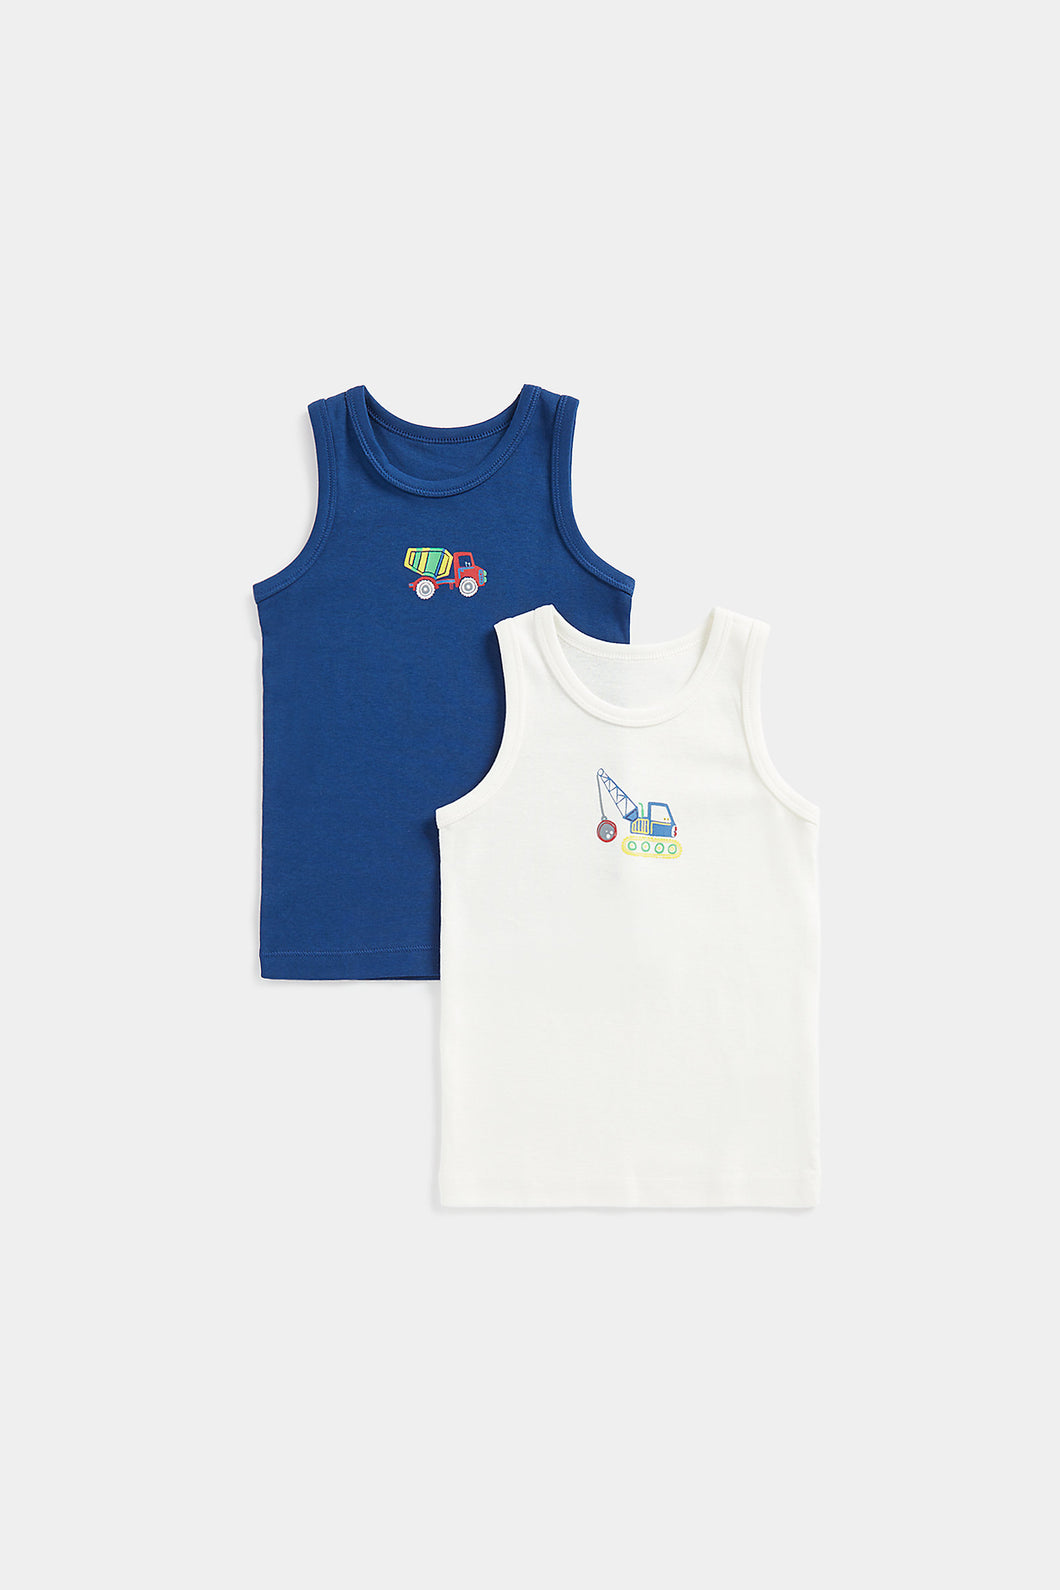 Mothercare Construction Sleeveless Vests - 2 Pack